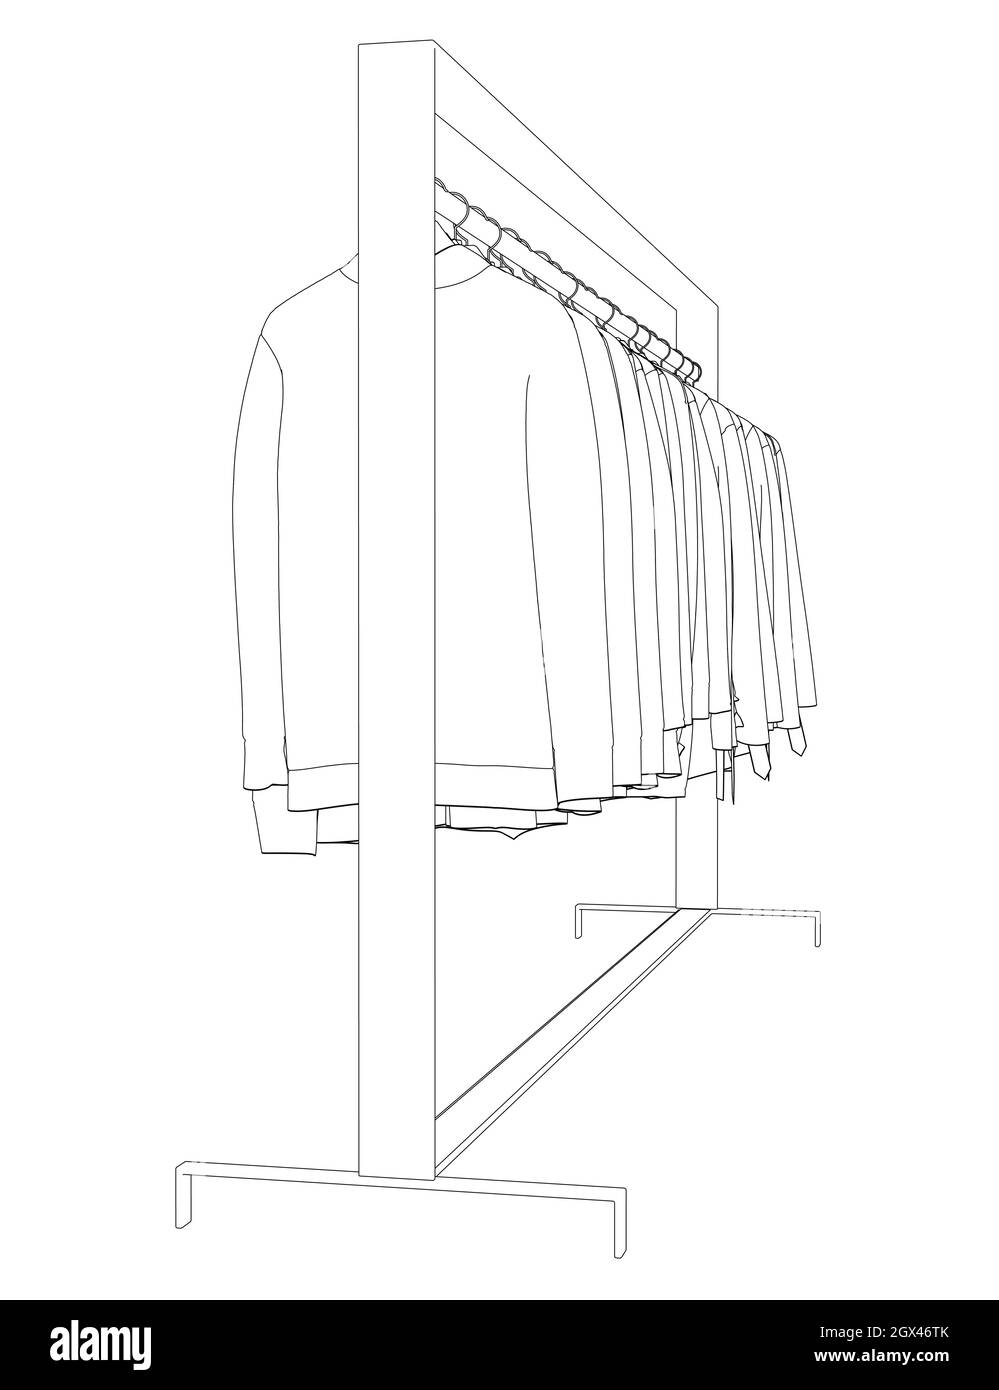 Outline of clothes hanging on a hanger isolated on white background ...